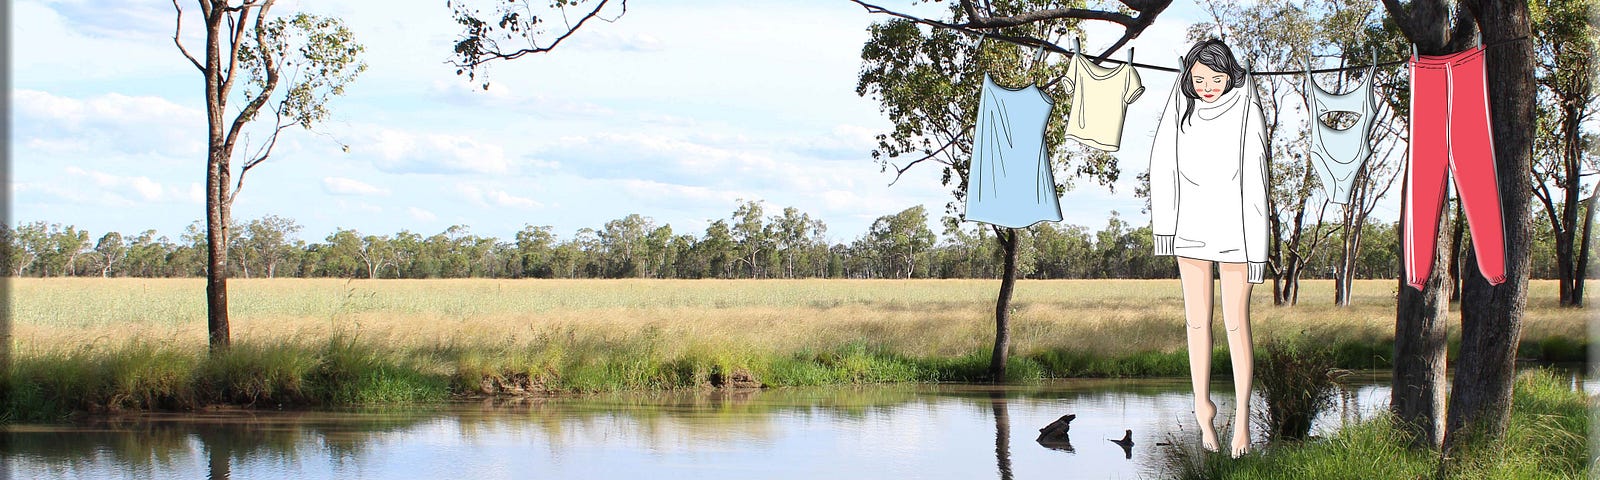 A woman hangs with clothes on a line across a billabong